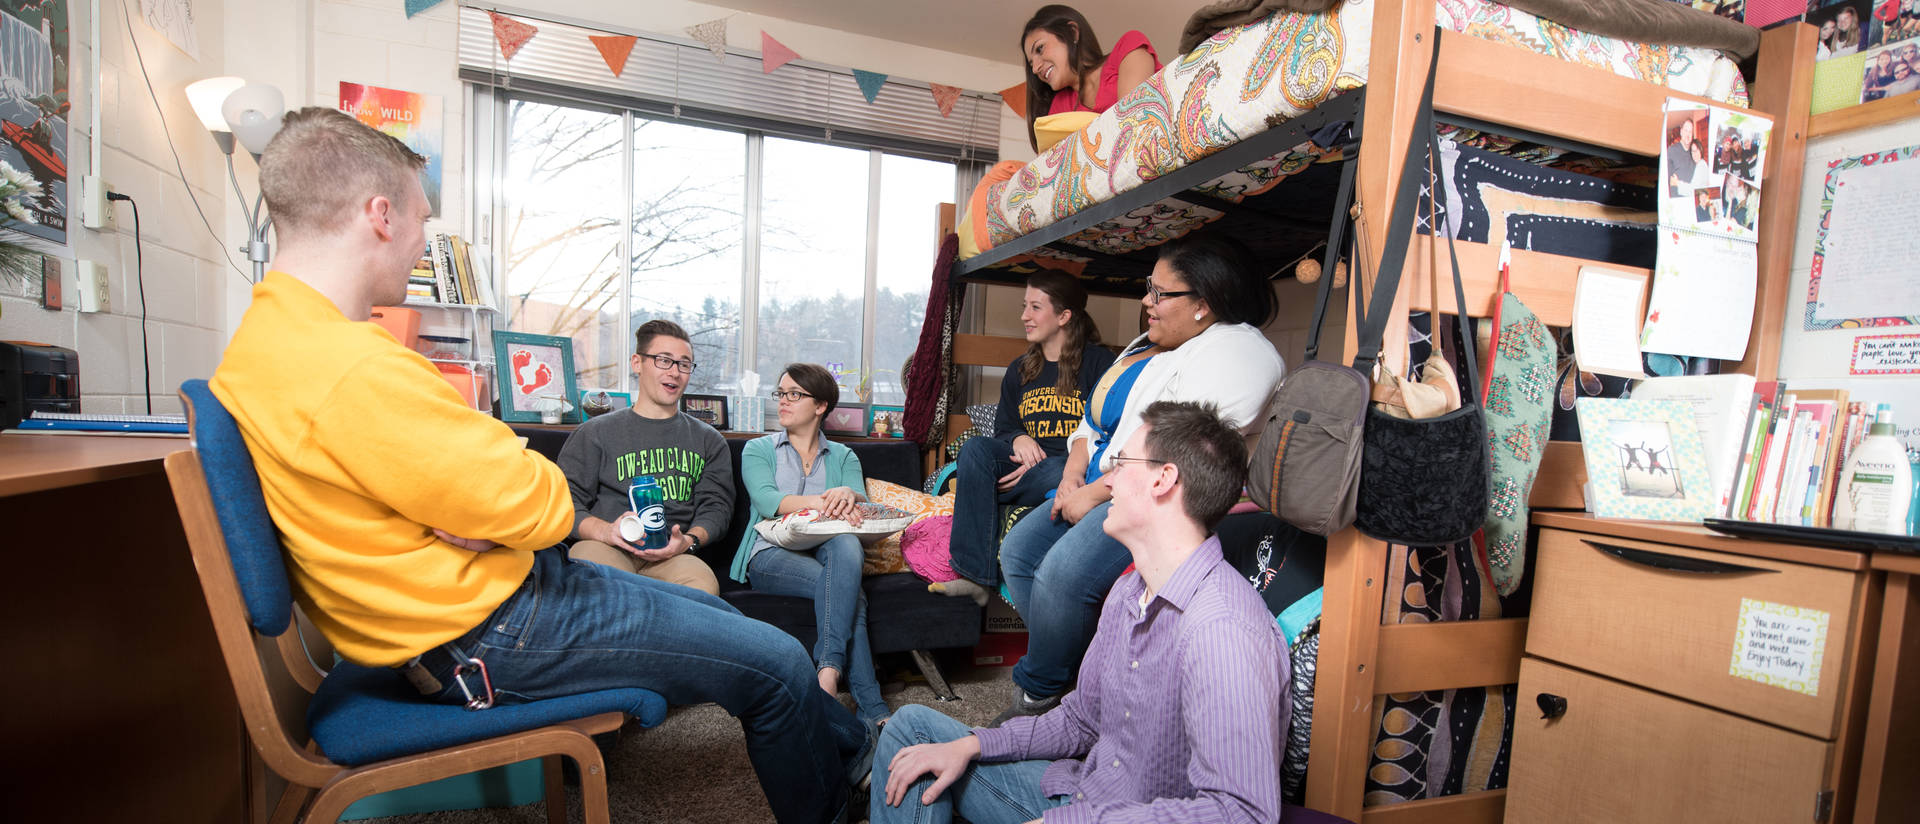 A Group of UWEC students gathered in a dorm room socializing